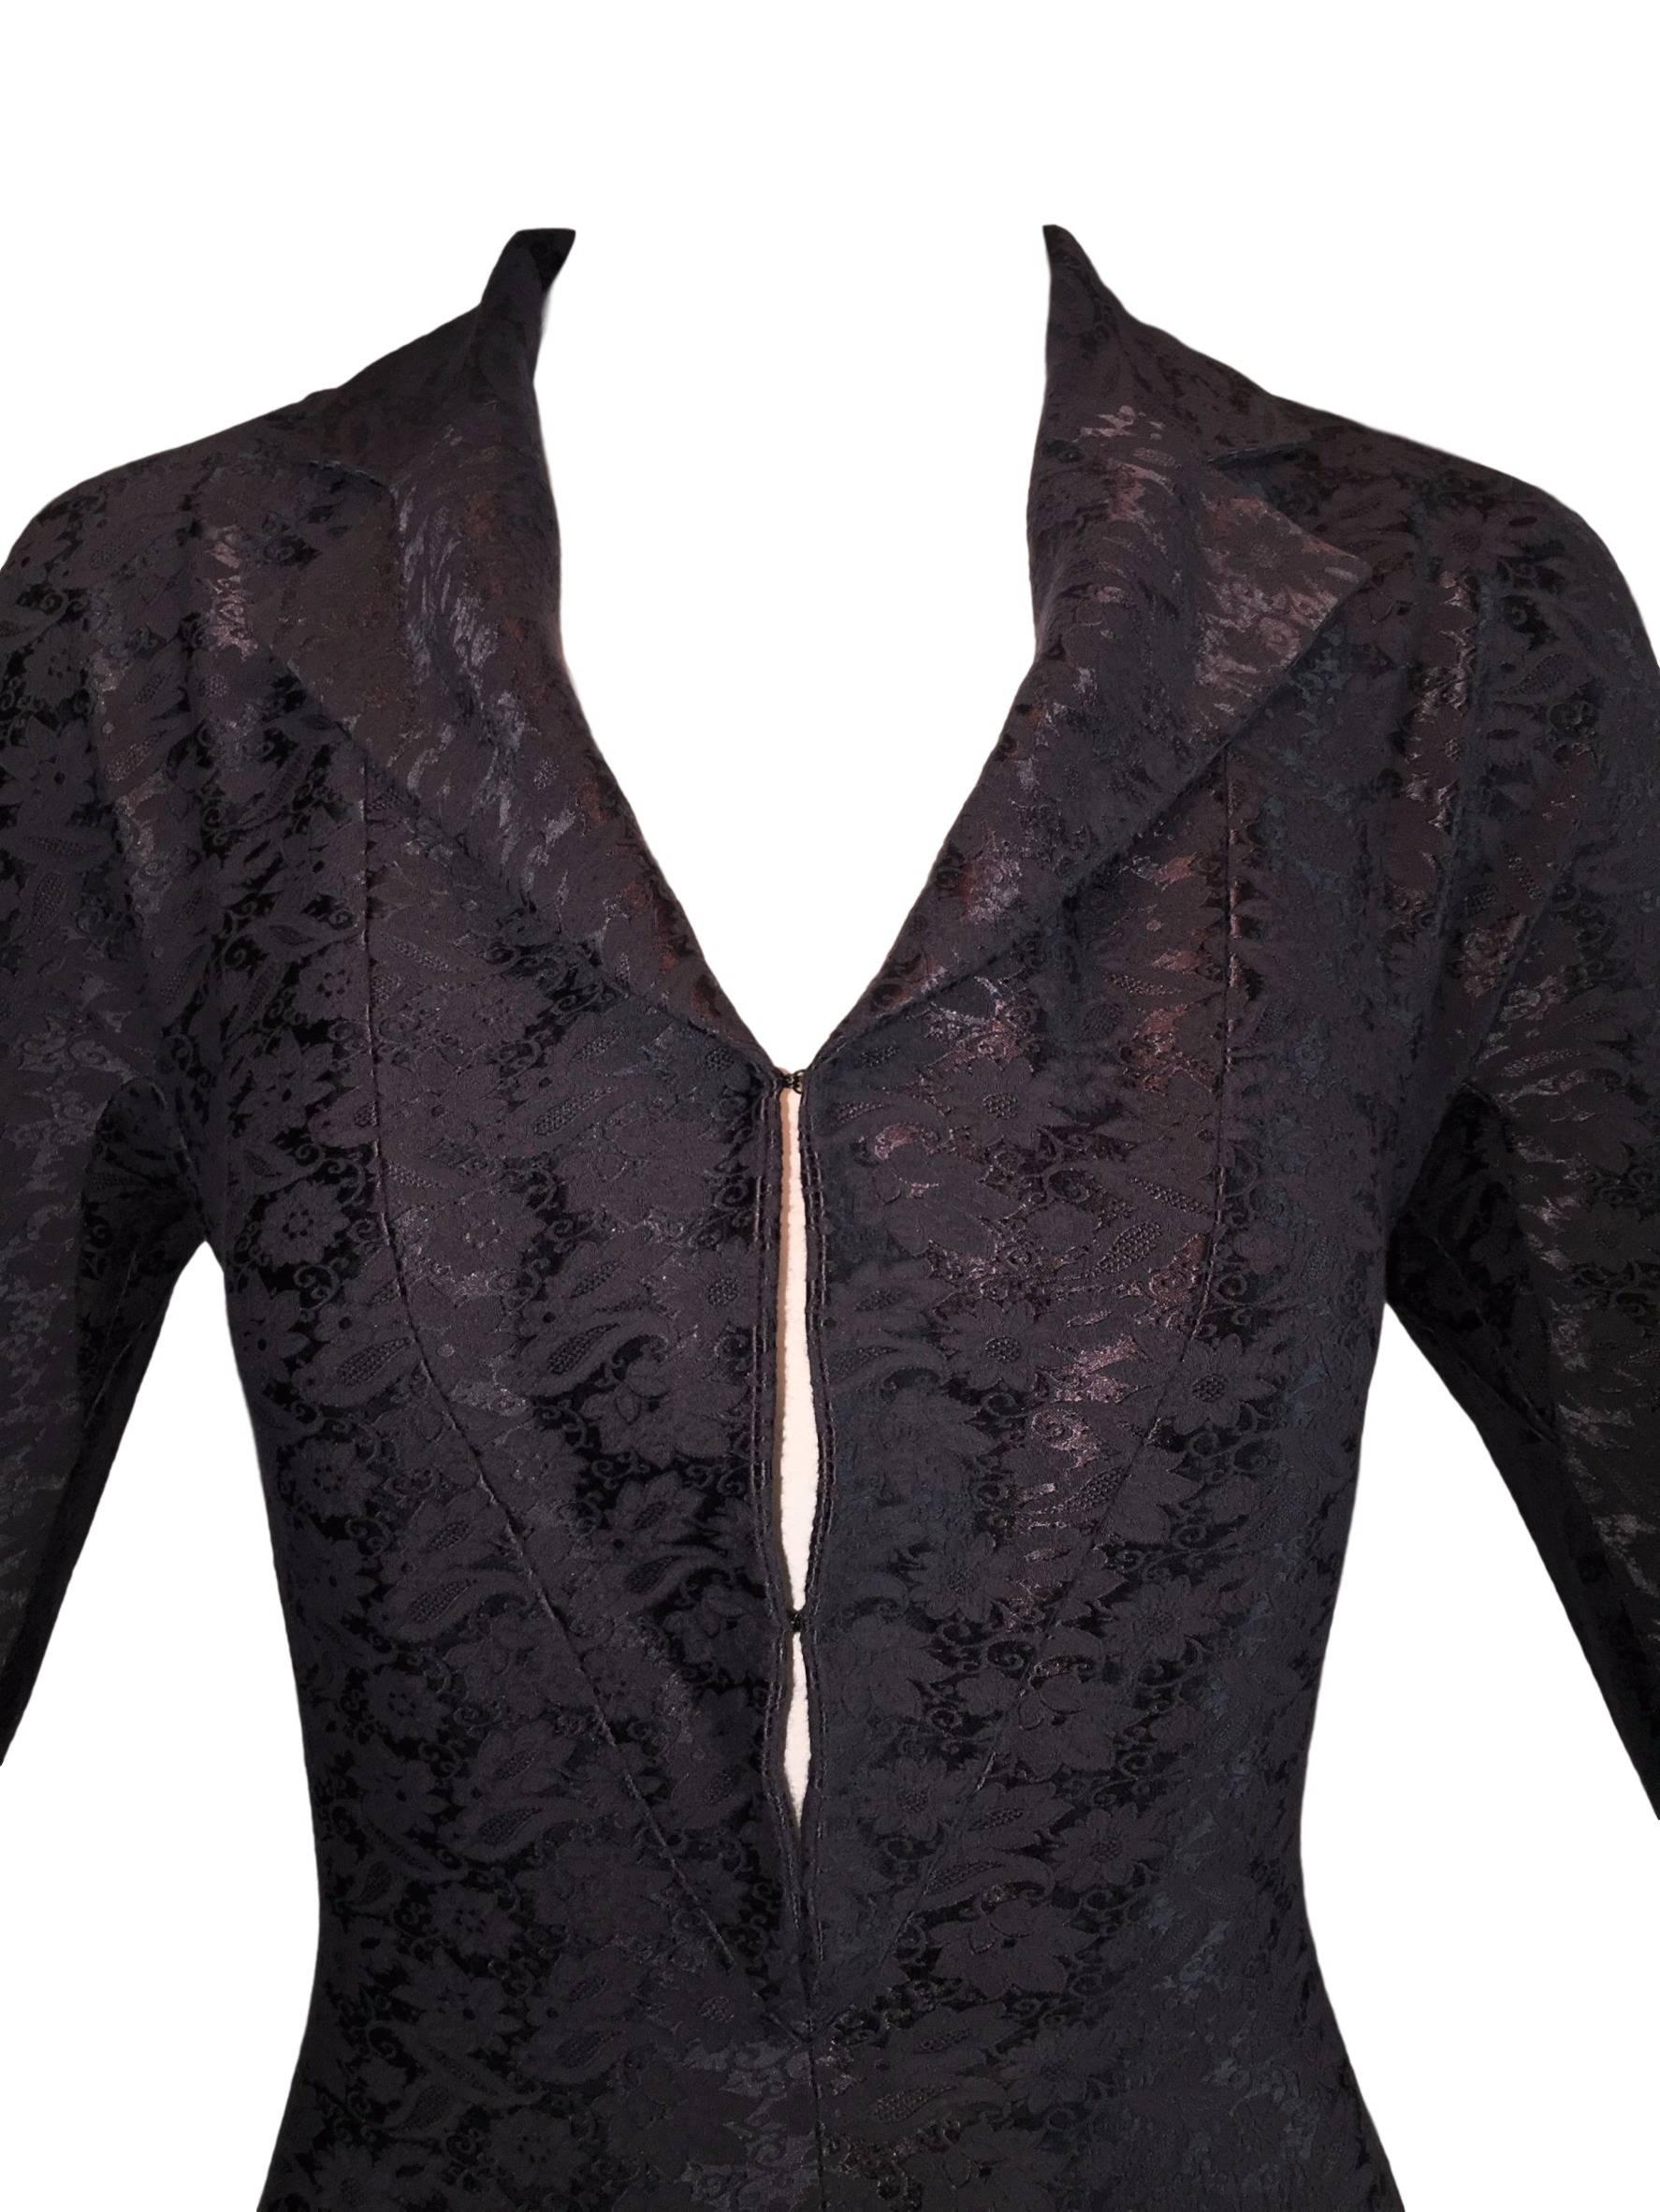 2000's Christian Dior by John Galliano Plum Brocade Plunging Bodysuit Top In Excellent Condition In Yukon, OK